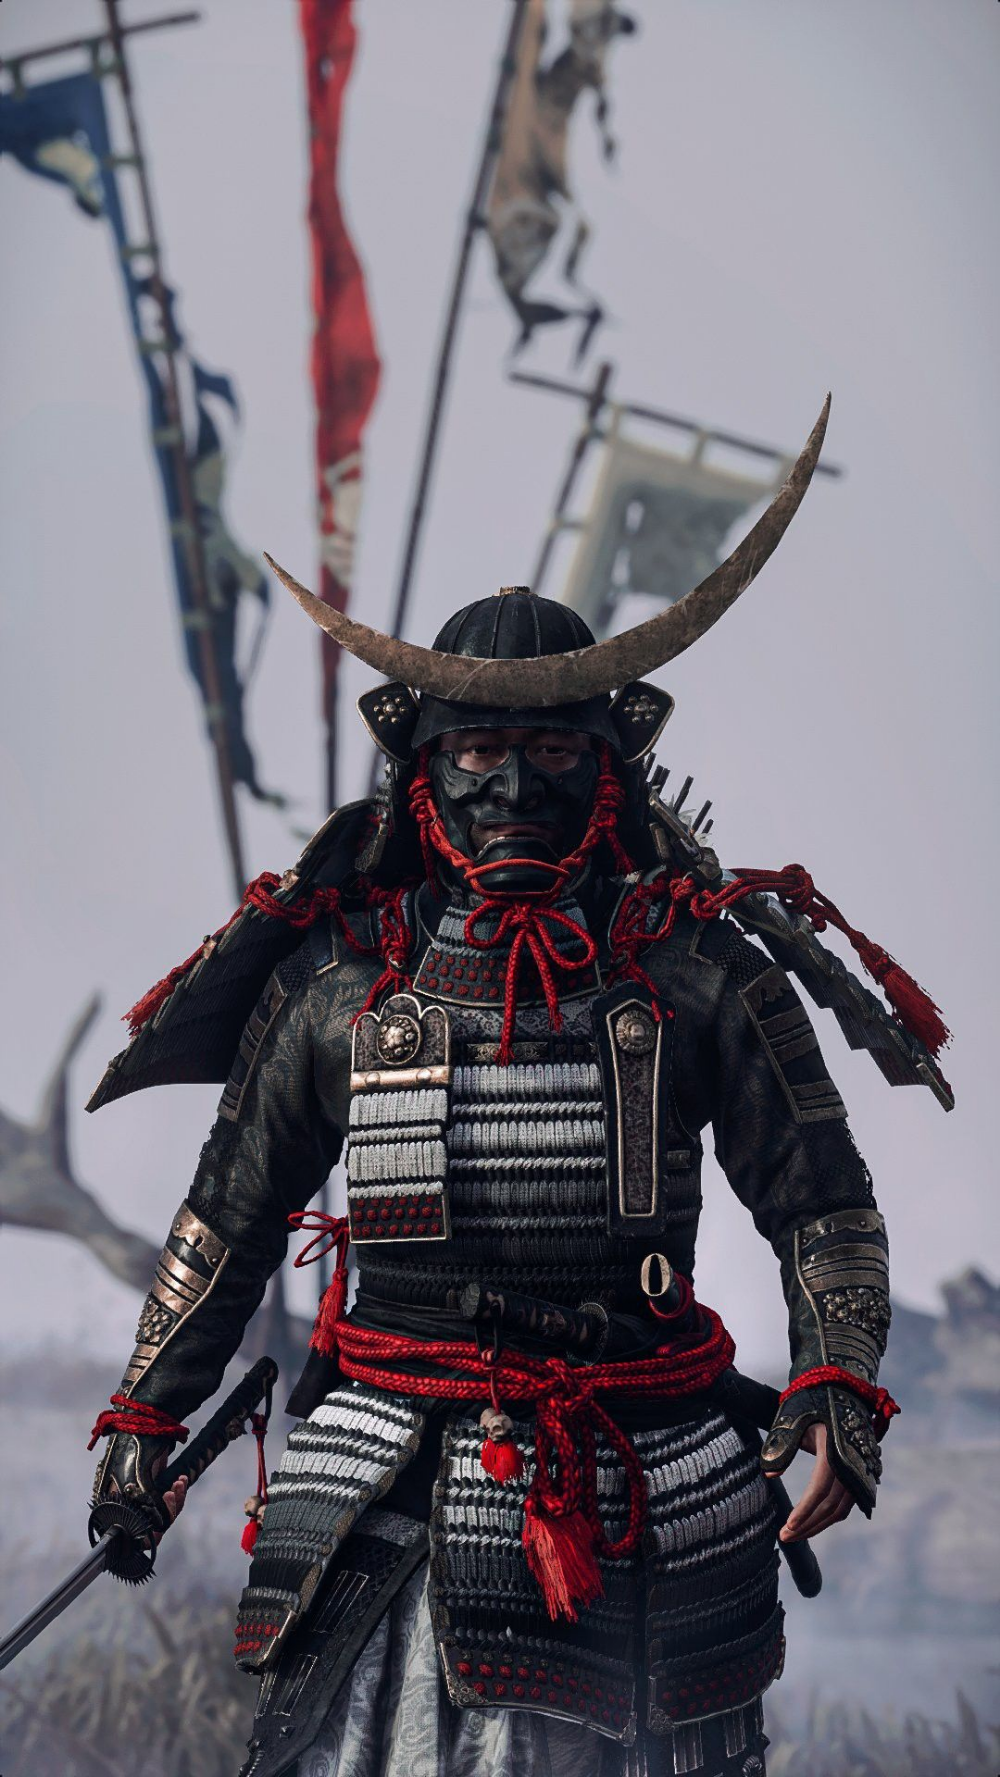 Ghost of Tsushima Armour smartphone wallpaper. Japanese art samurai, Ghost of tsushima, Samurai art